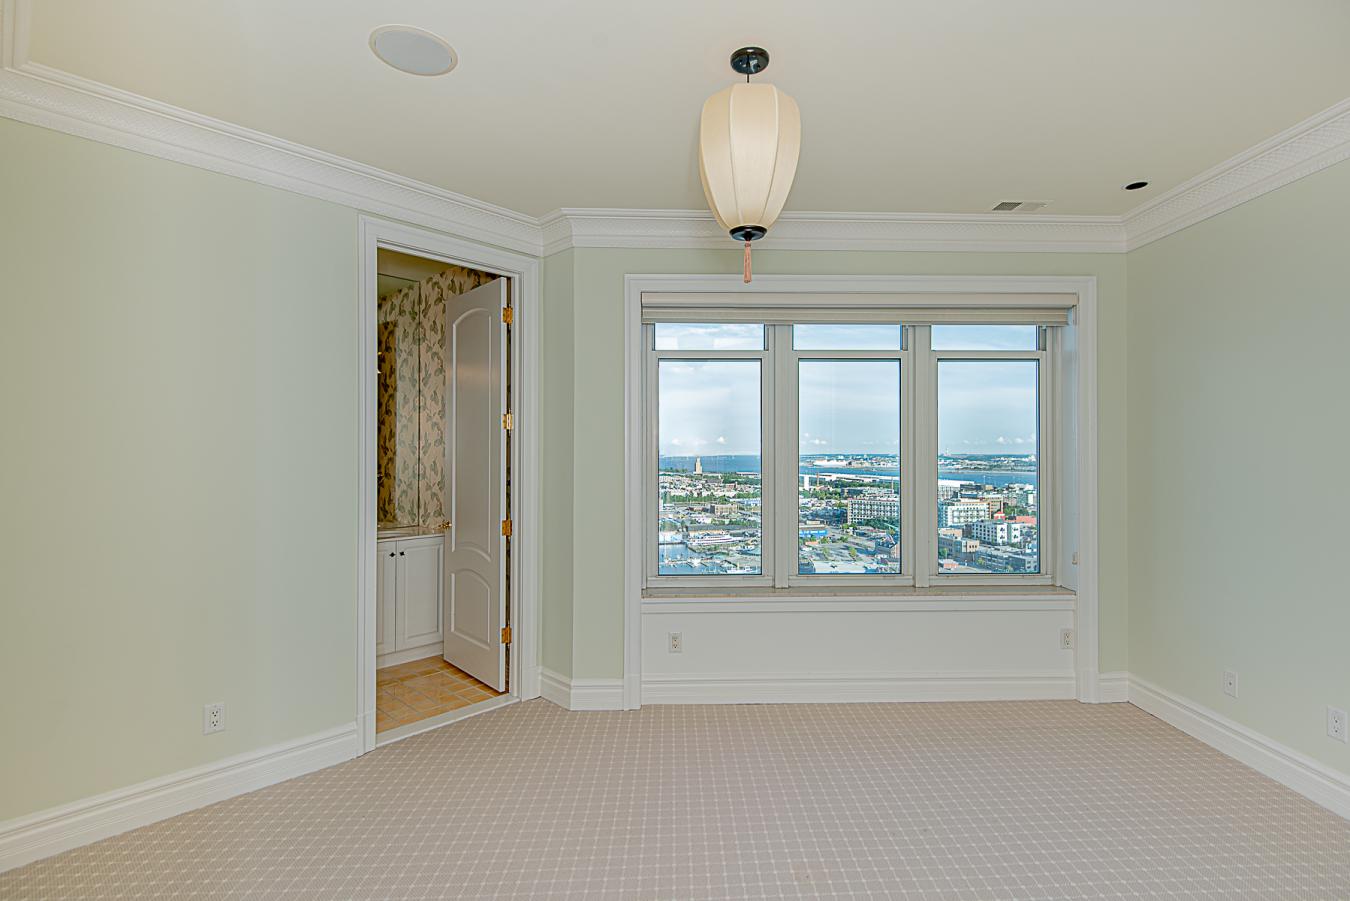 100 Harborview Drive, Penthouse #4C, Baltimore, Maryland, 21230, United States, 3 Bedrooms Bedrooms, ,3 BathroomsBathrooms,Residential,For Sale,100 Harborview Drive, Penthouse #4C,794499